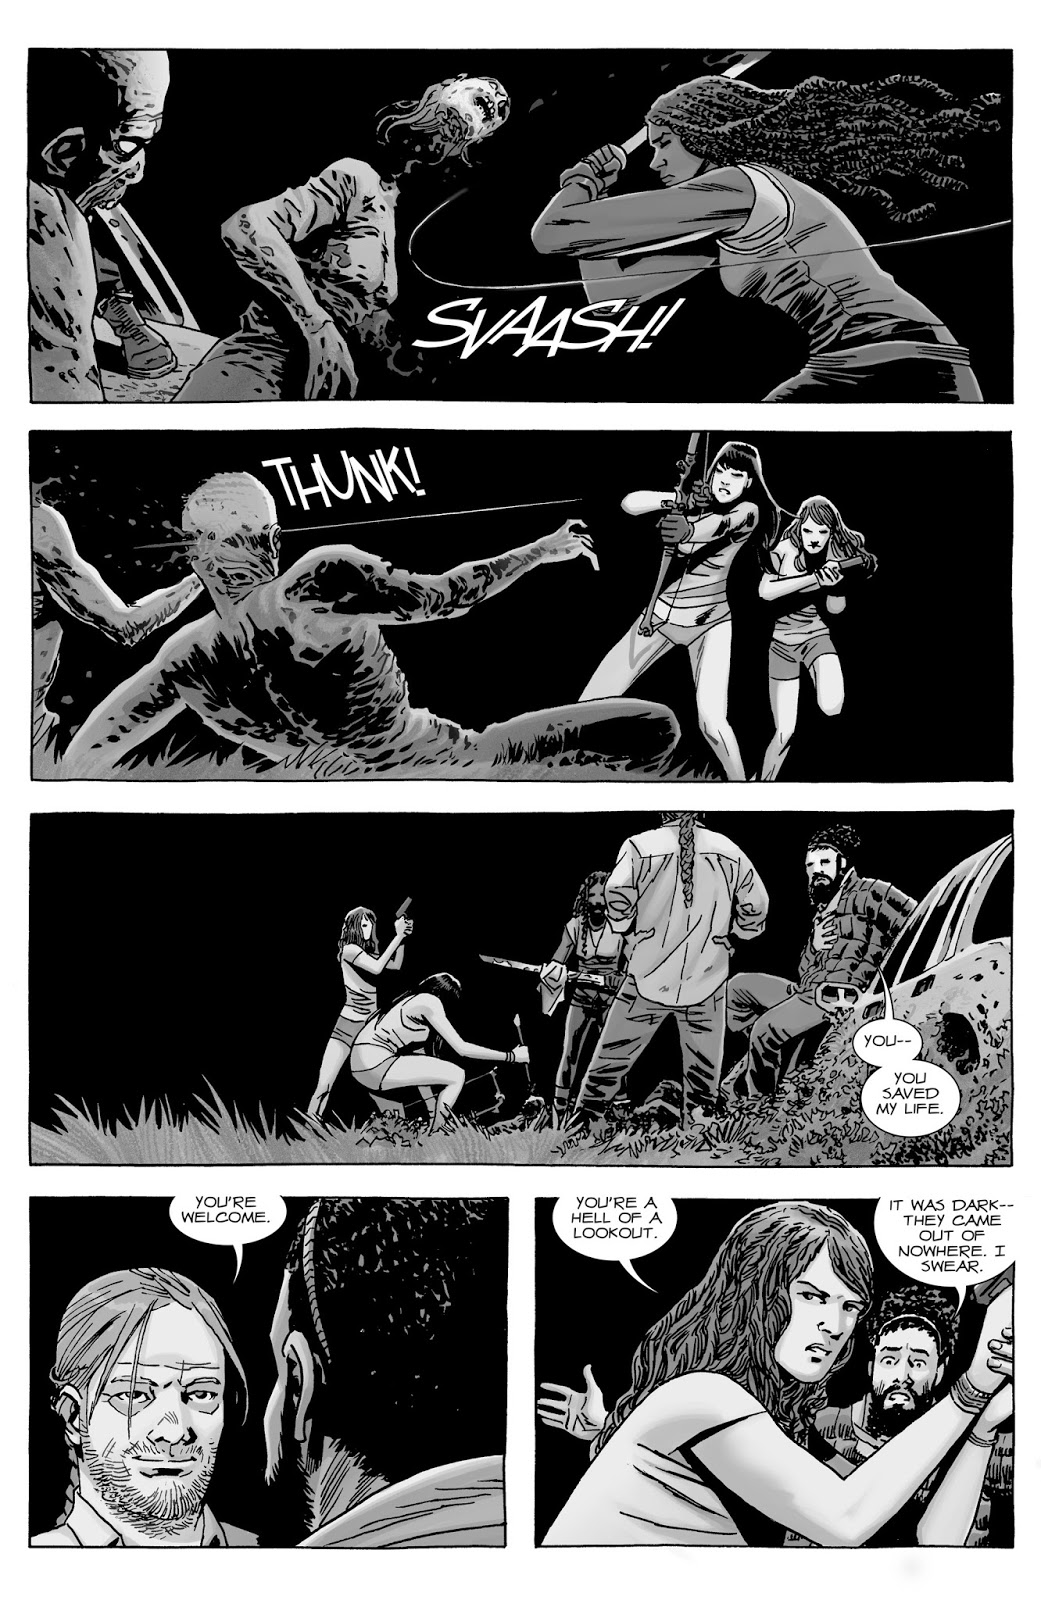 The Walking Dead 29 Lines We Cross review